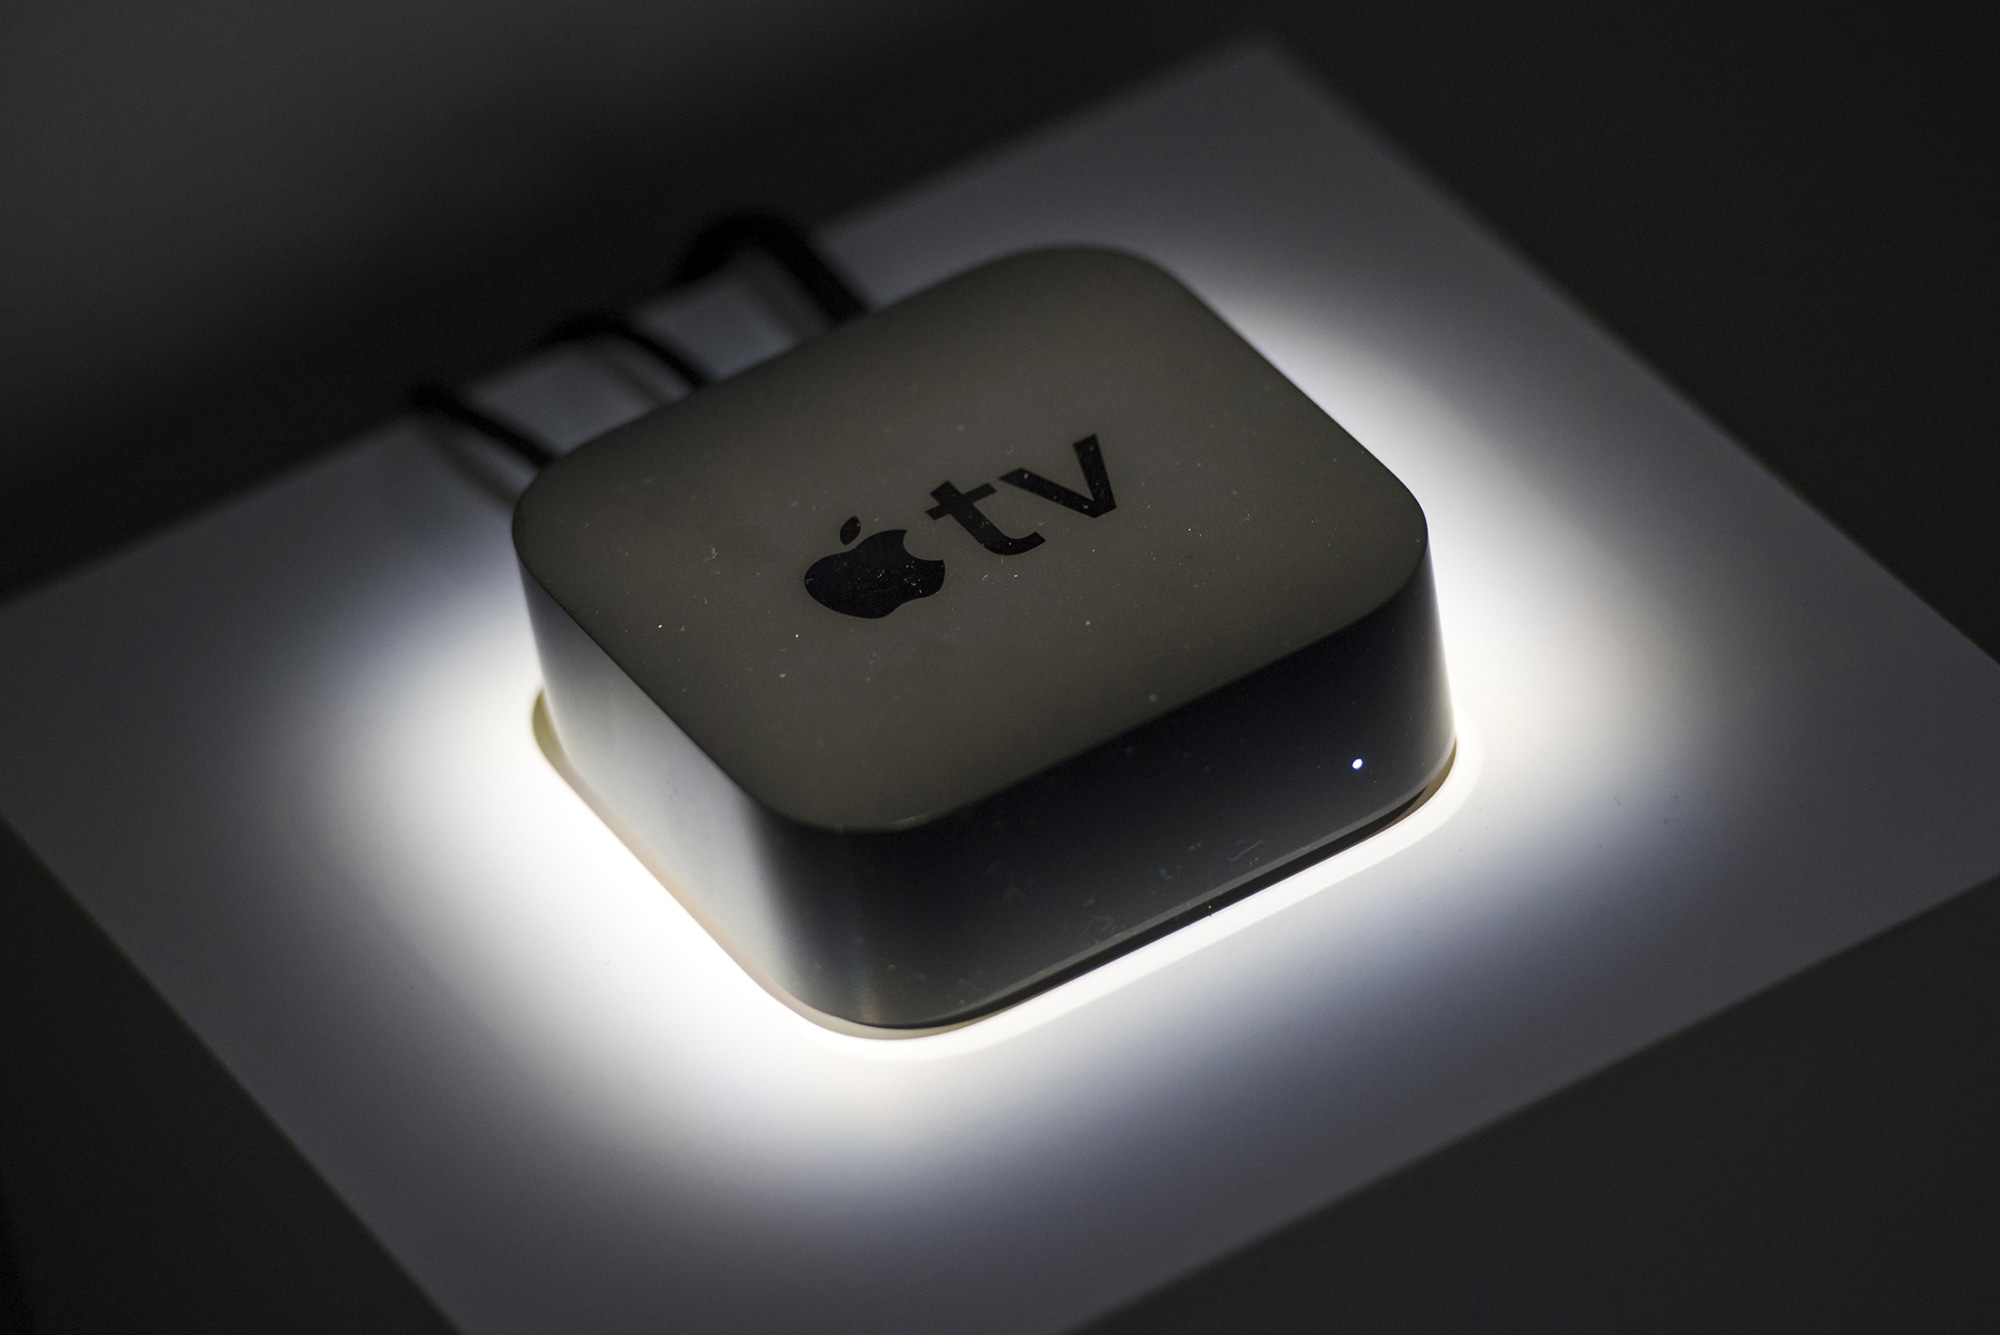 Apple to present new Apple TV with 4K, HDR and live content at September event